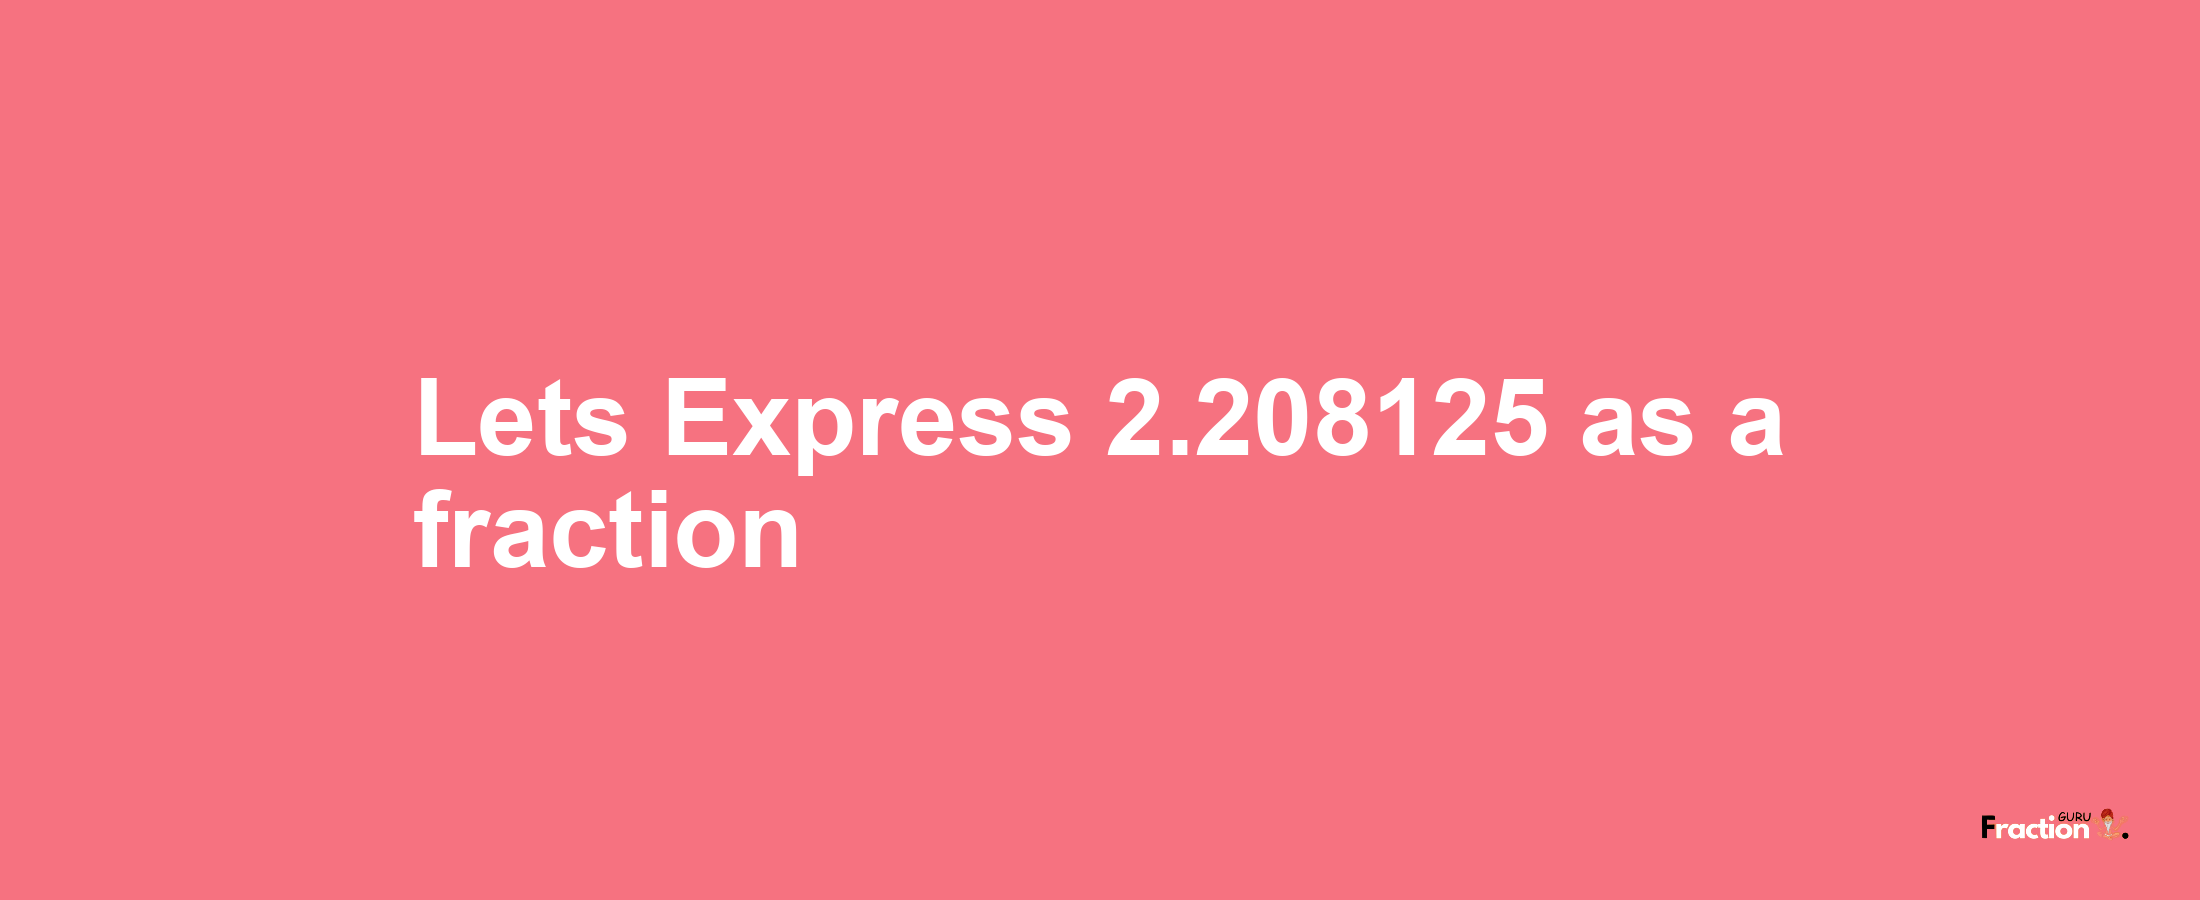 Lets Express 2.208125 as afraction